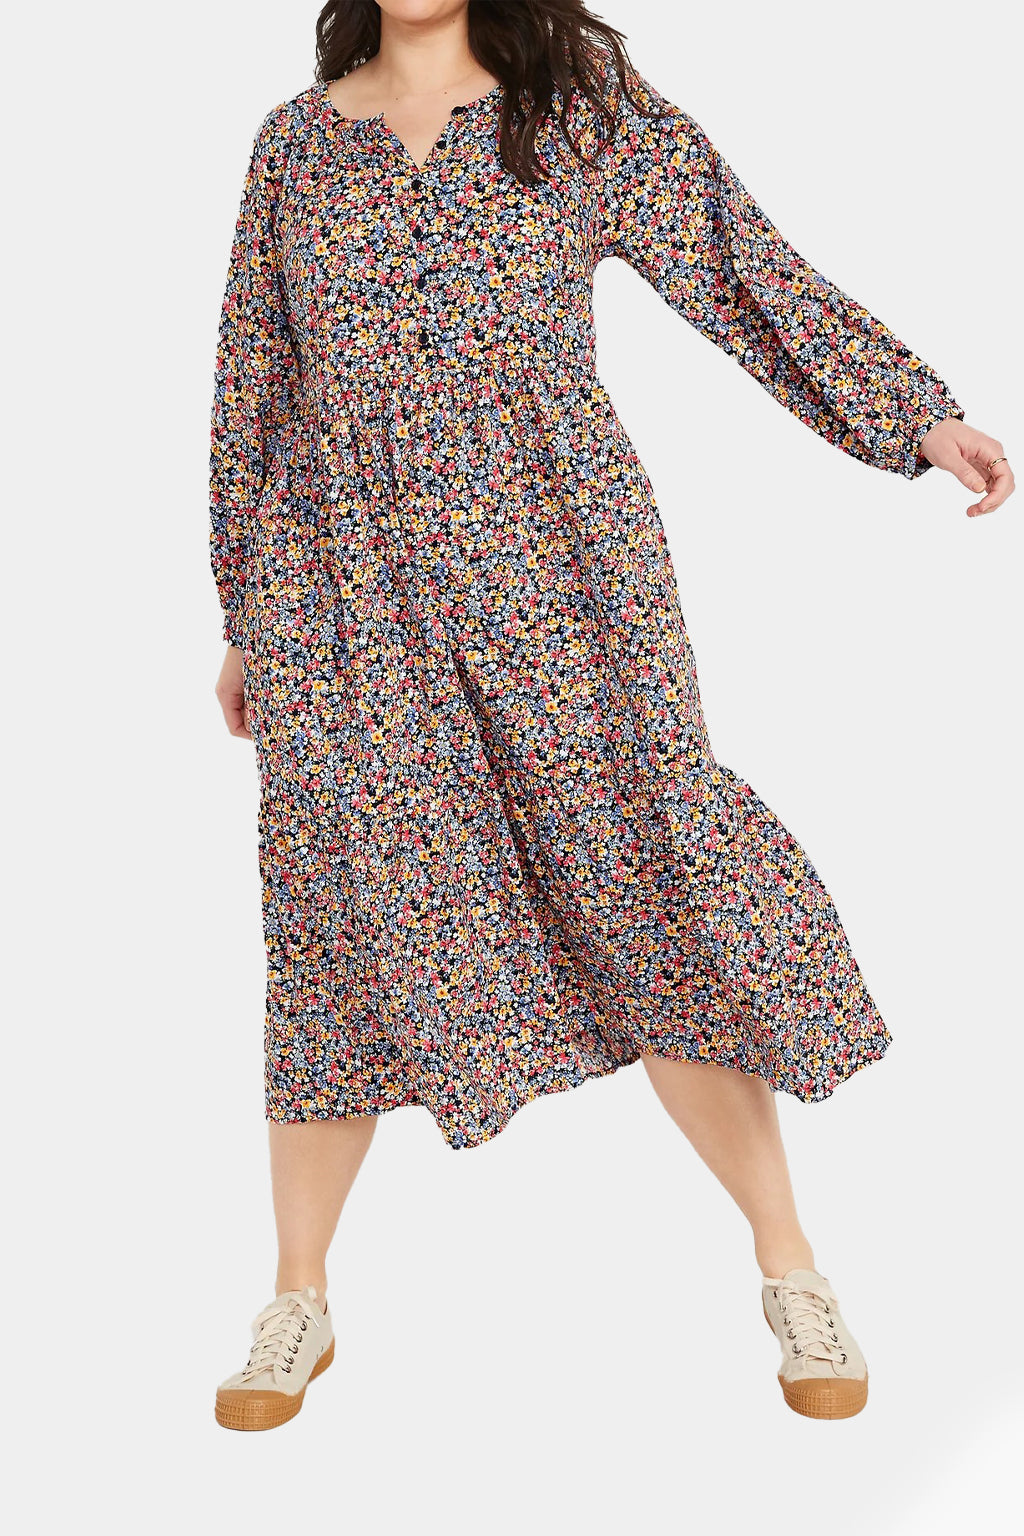 Old Navy - Printed Button-Front All-Day Midi Swing Dress